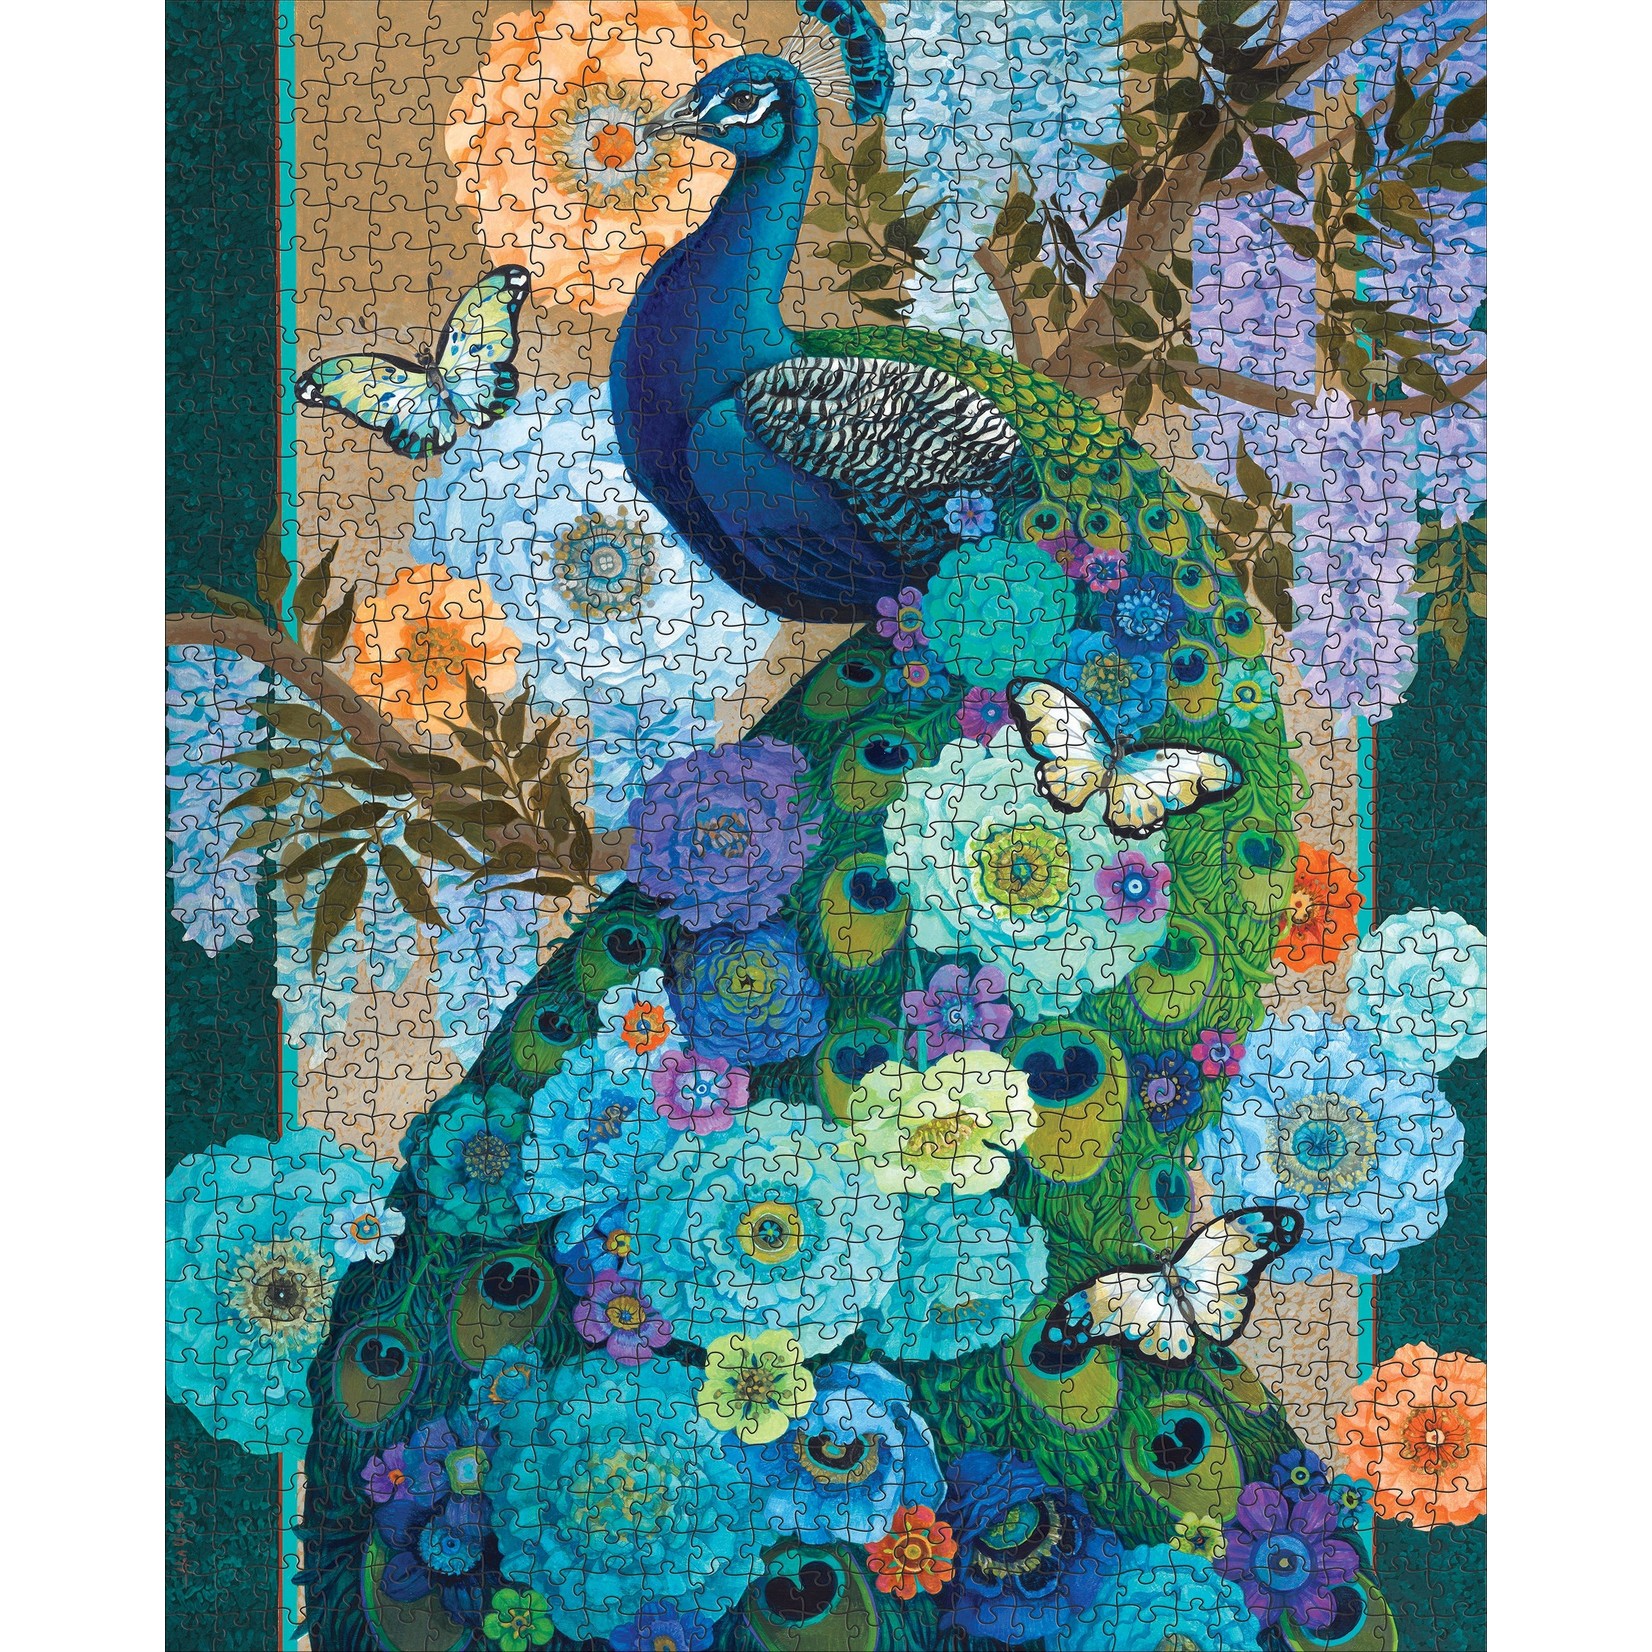 Pomegranate Floral Peacock by David Galchutt, 1000-Piece Jigsaw Puzzle